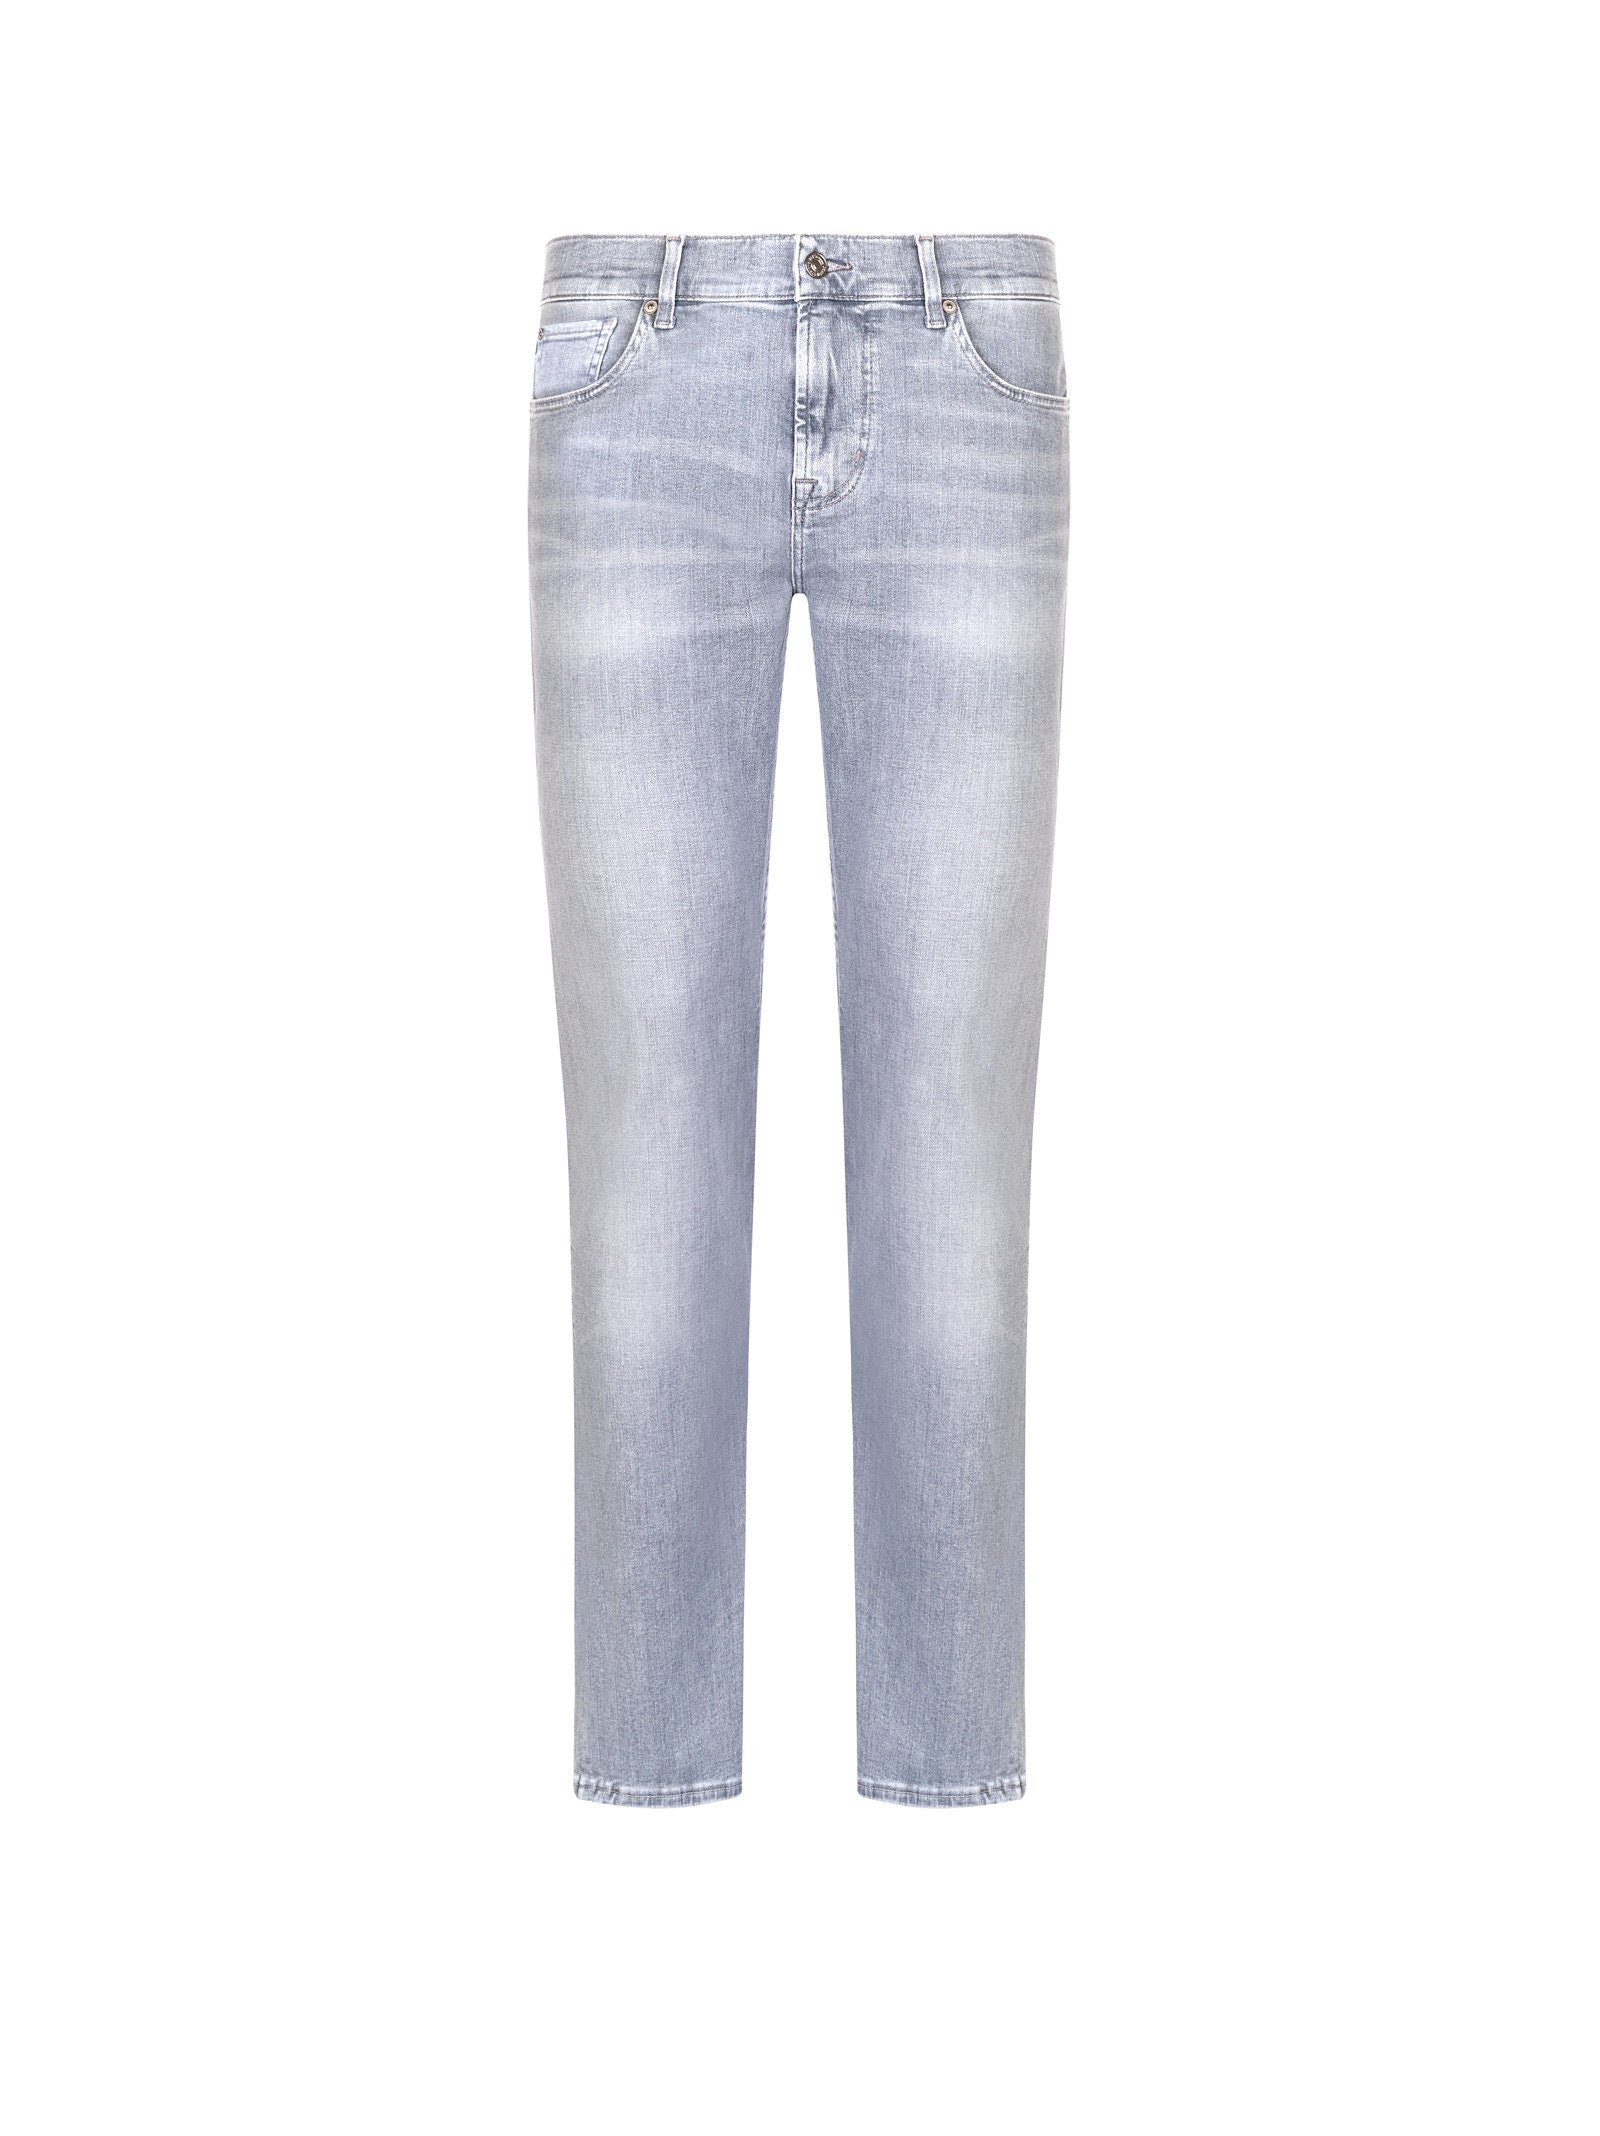 Jeans 7 FOR ALL MANKIND
Grigio